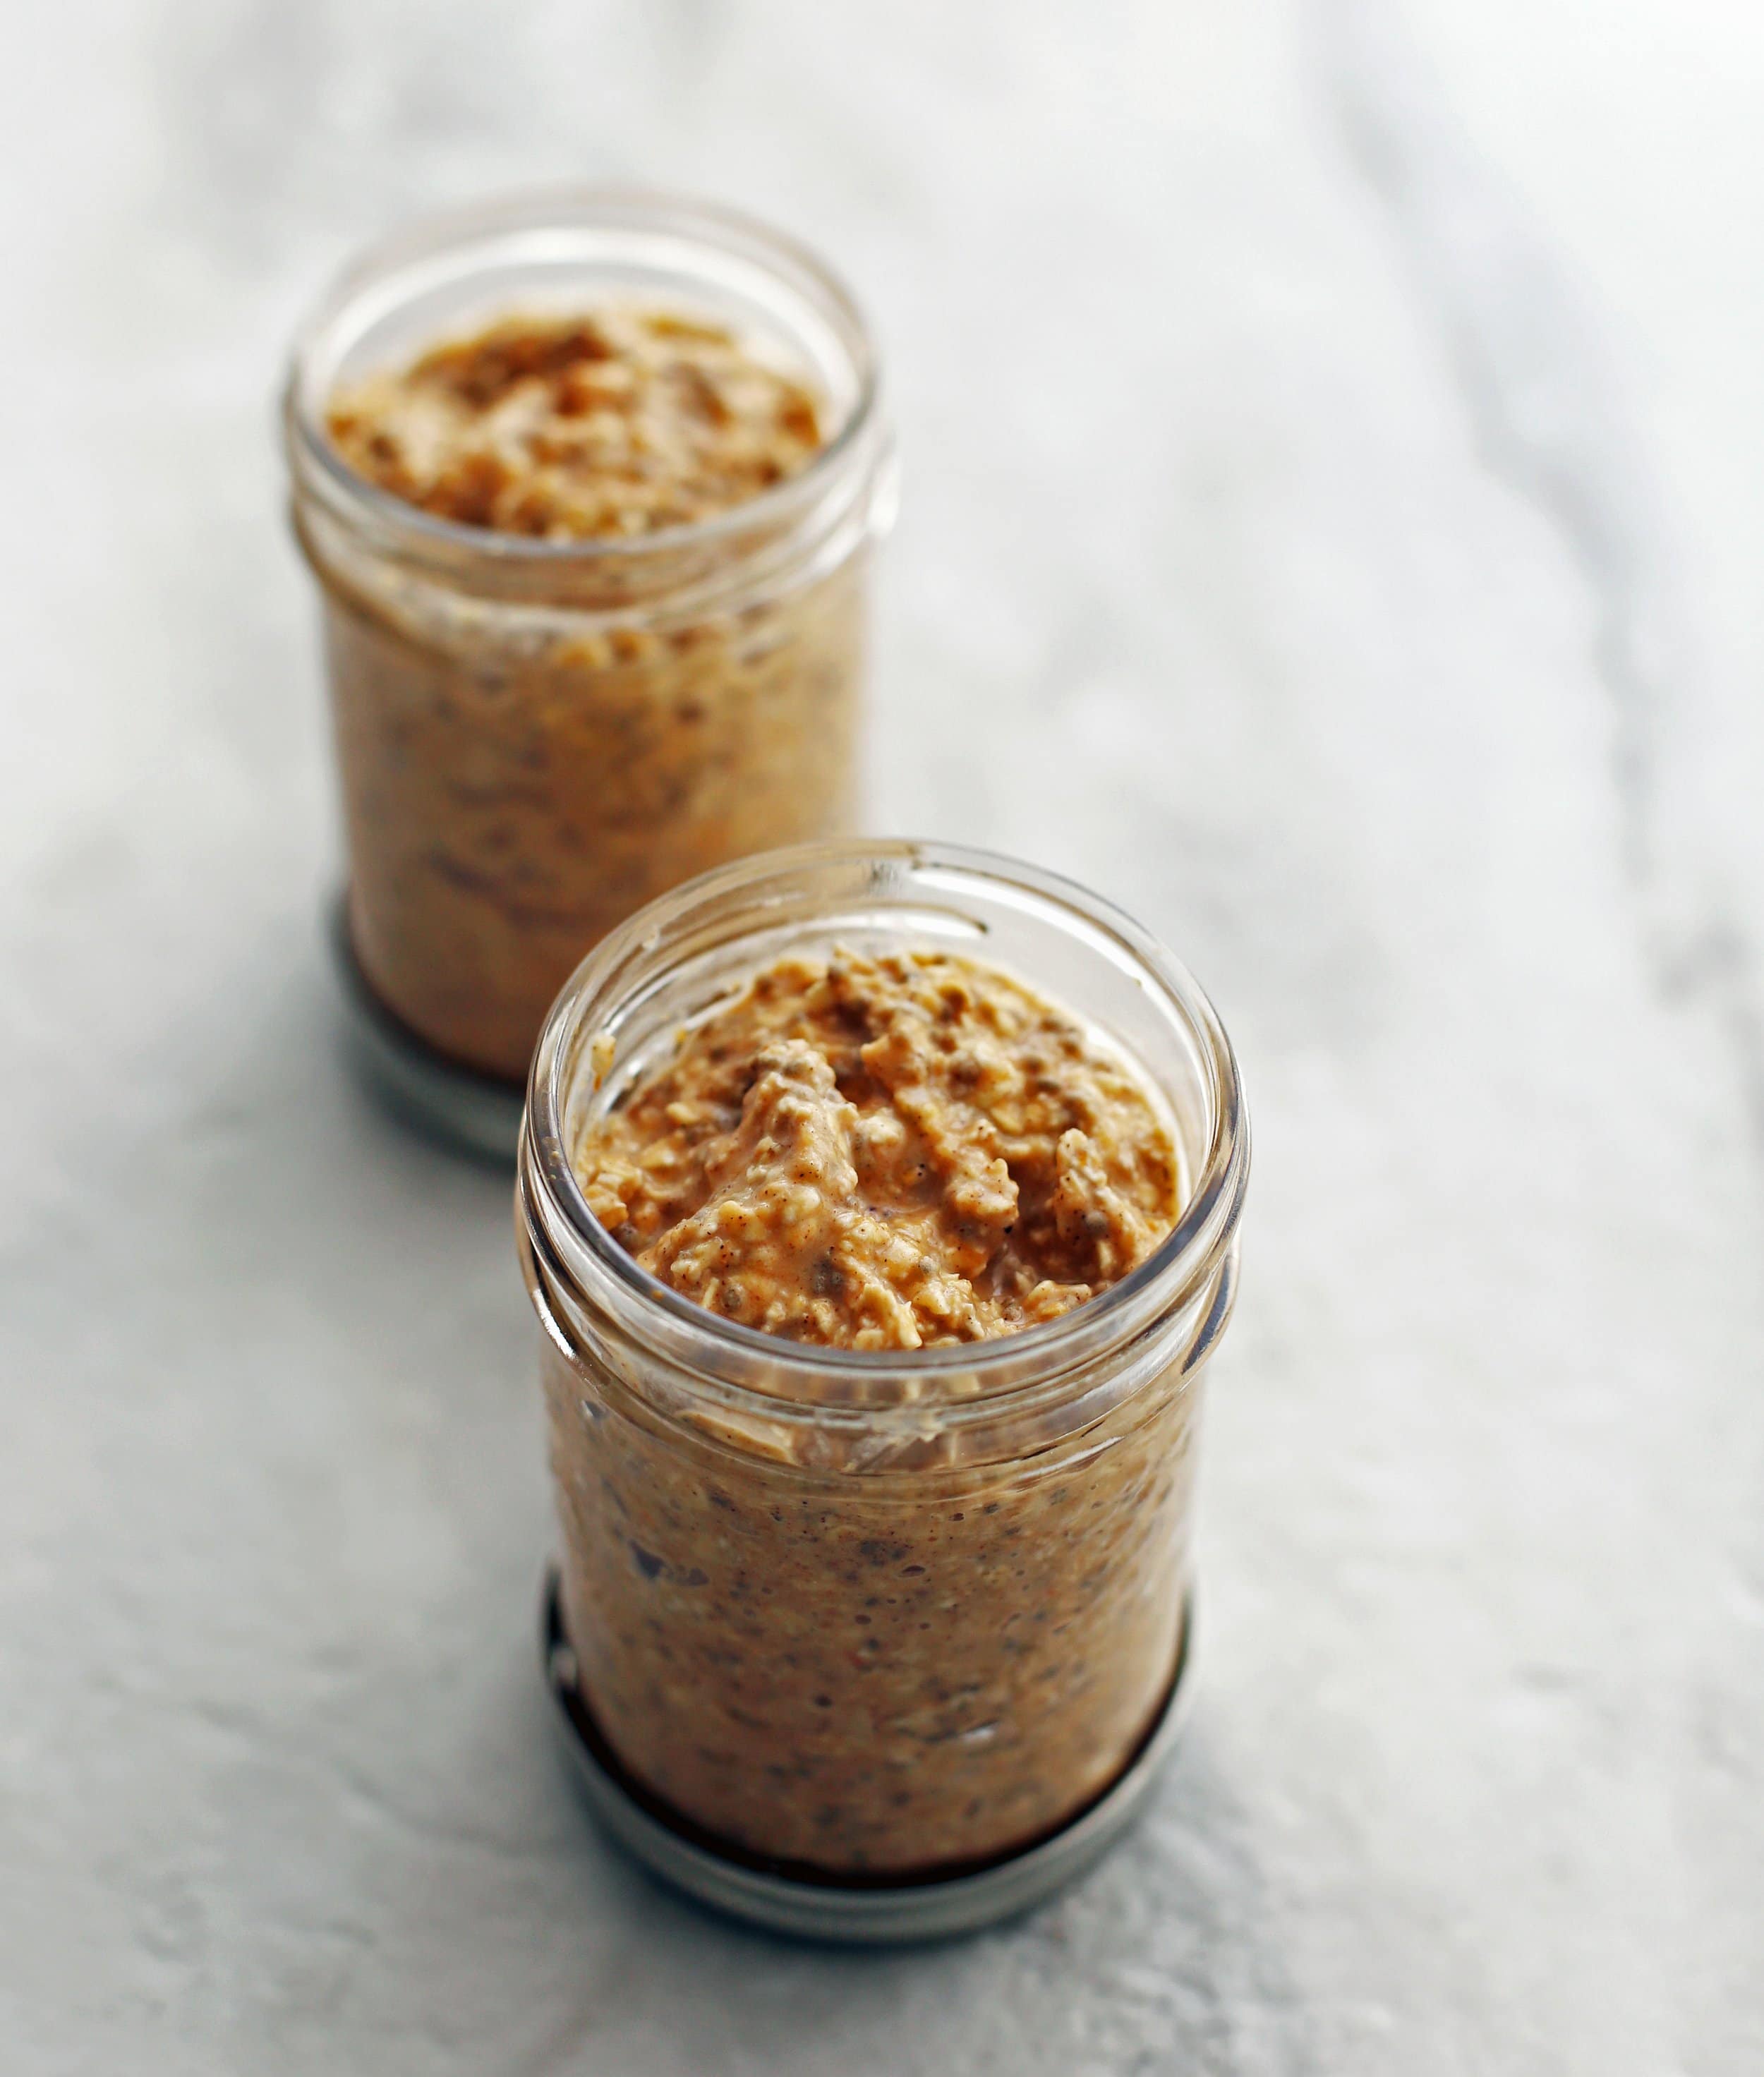 Two mason jars full of chai spiced pumpkin overnight oats on a white surface.